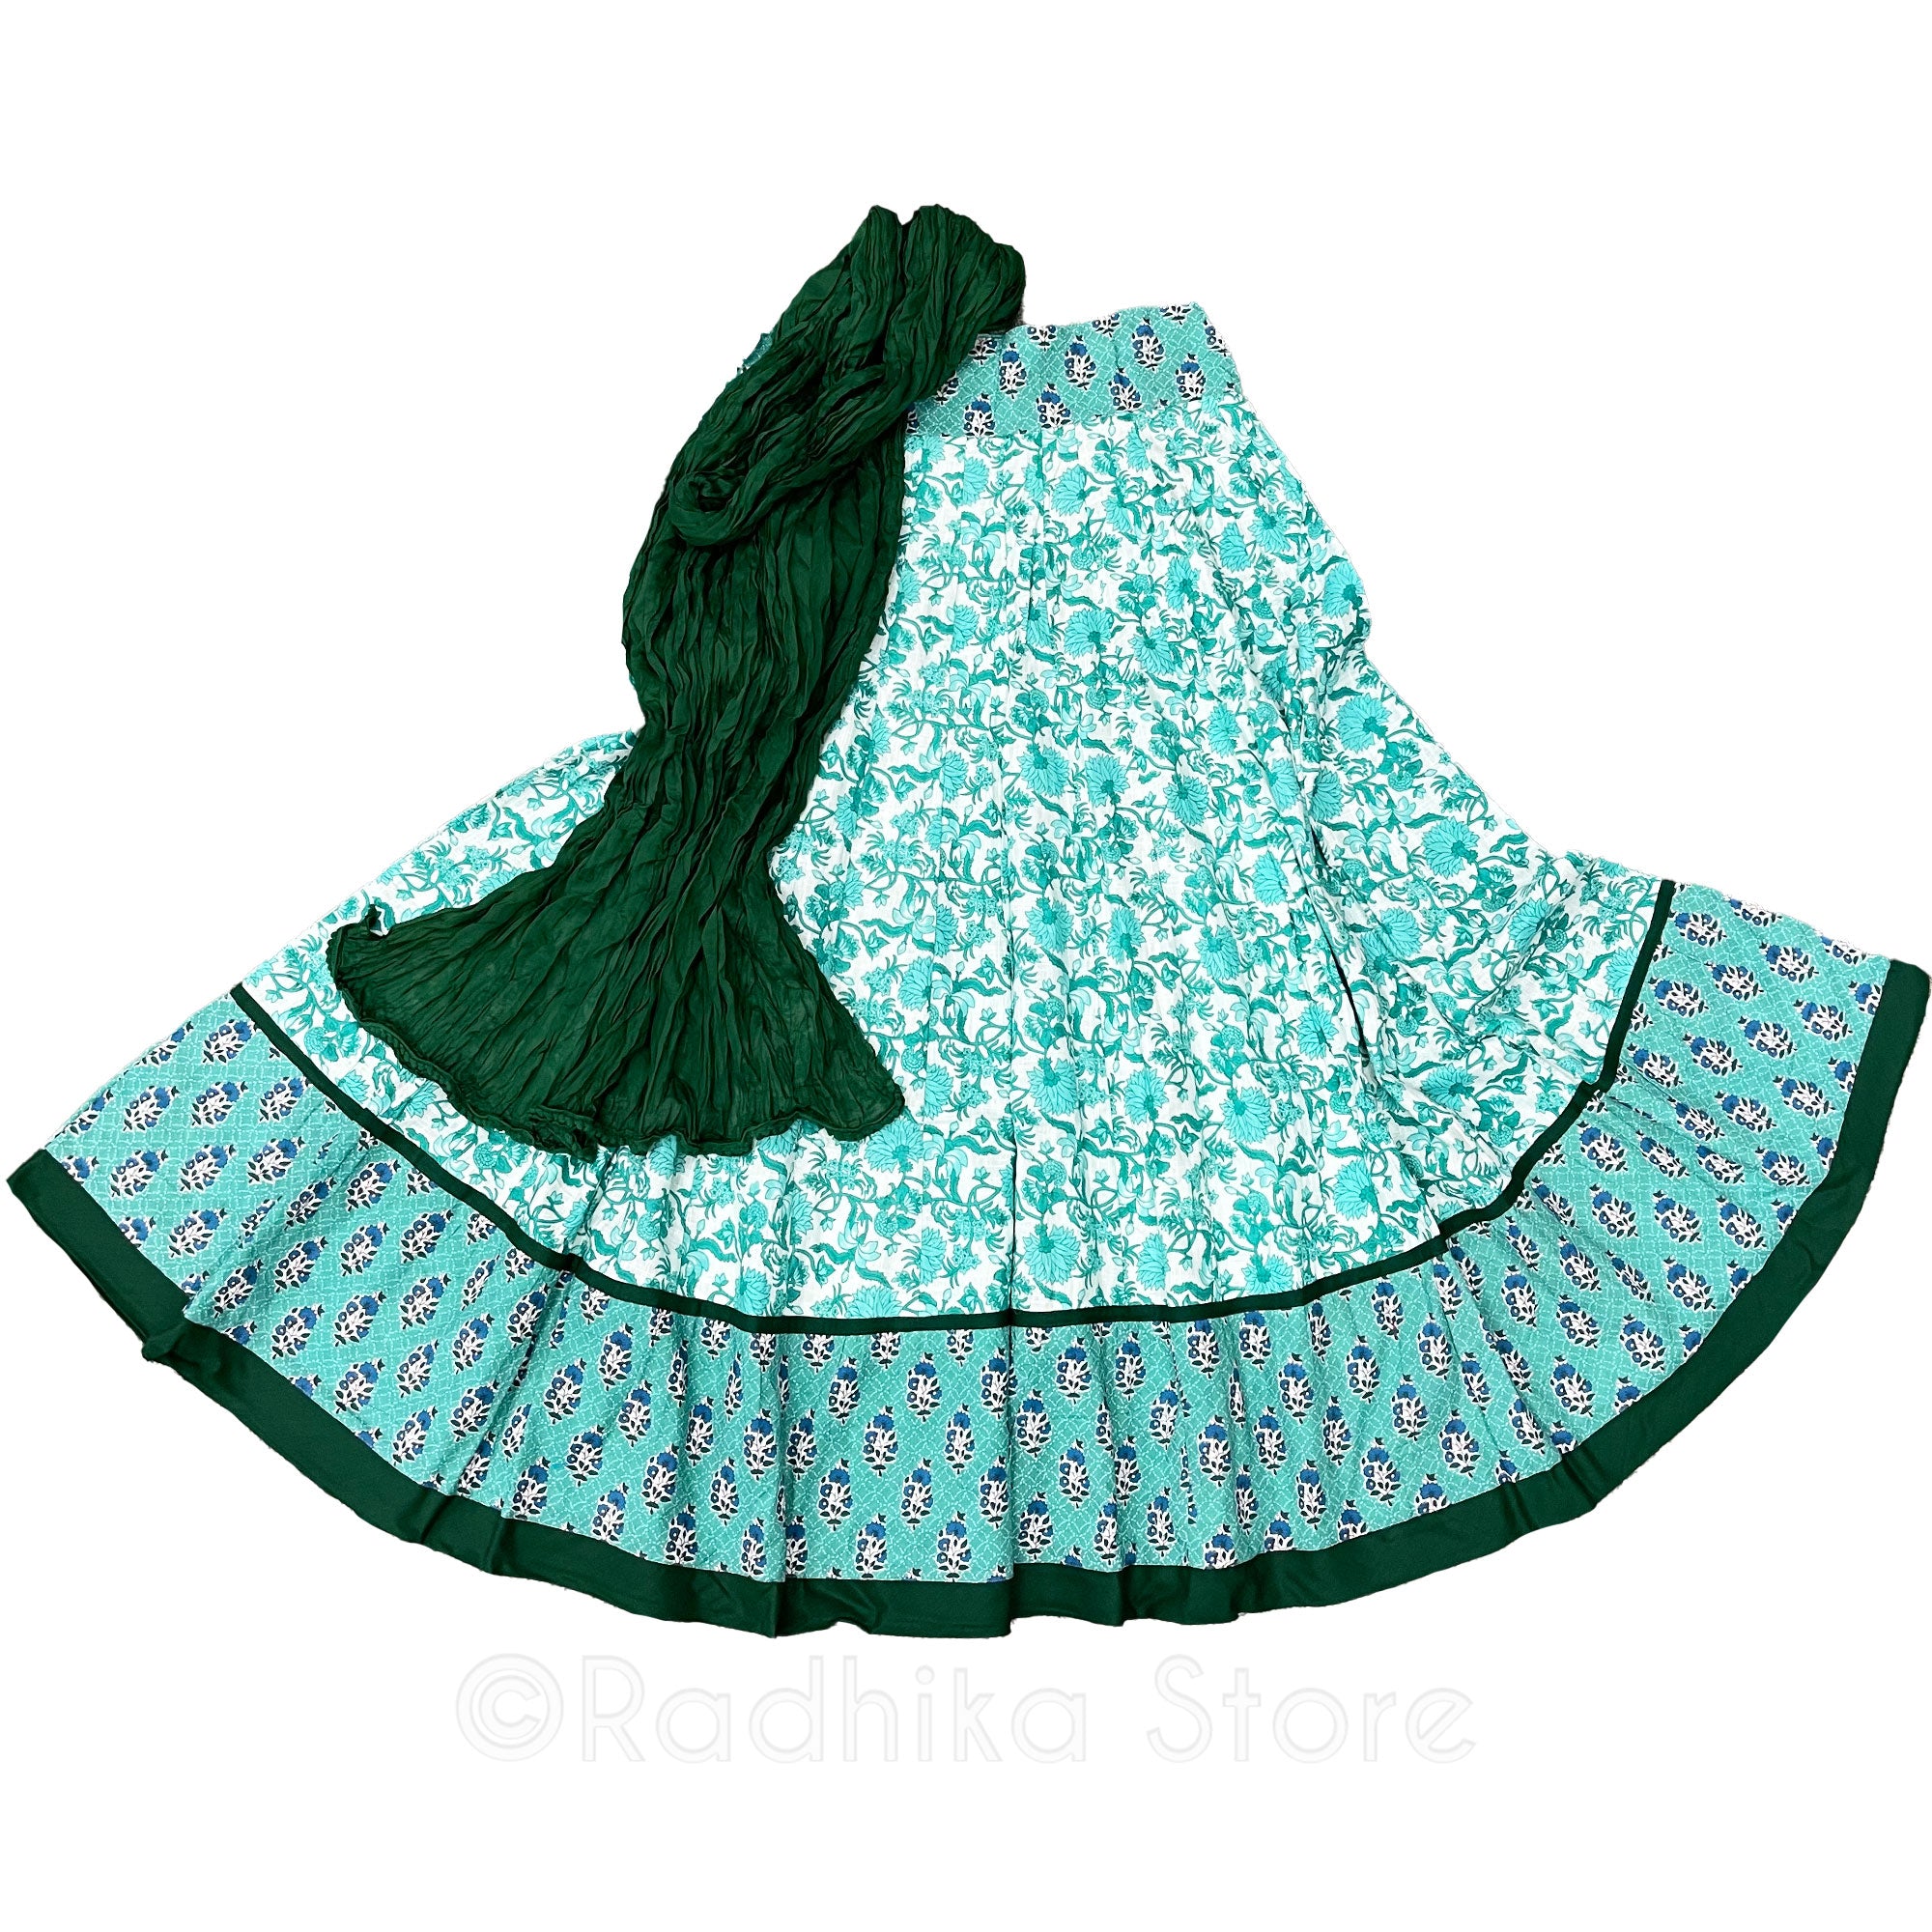 Raman Reti Forest Flowers -  Gopi Skirt - Teal and Forest Greens - Cotton Screen Print Fabric - With Chadar - Large